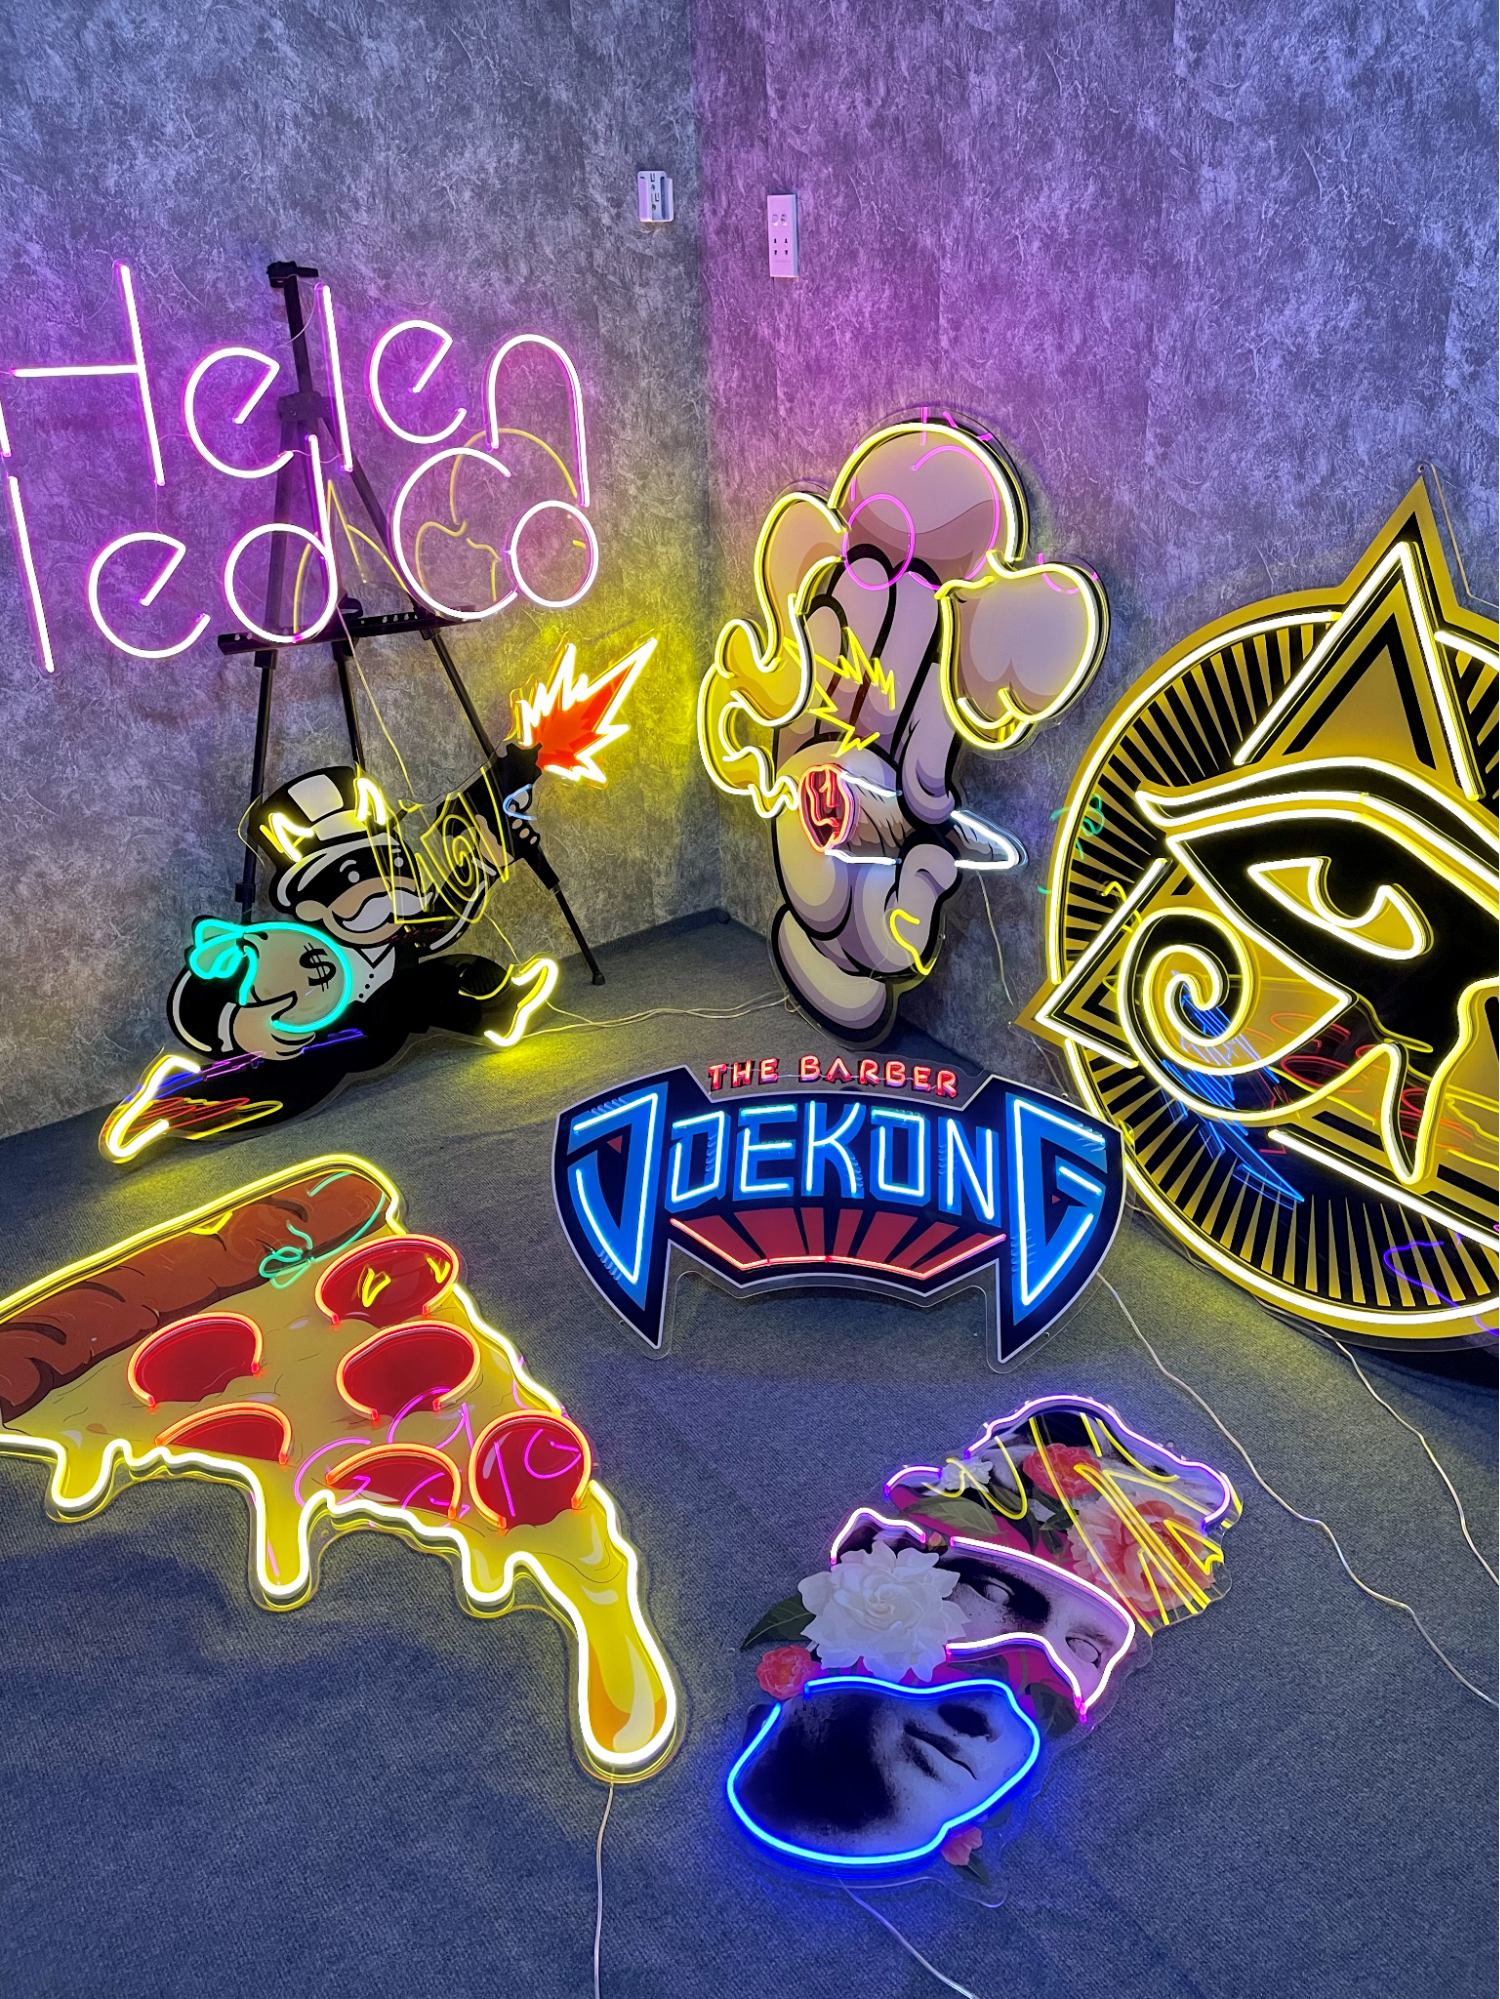 Purchase stunning pizza neon style at HelenLedCo